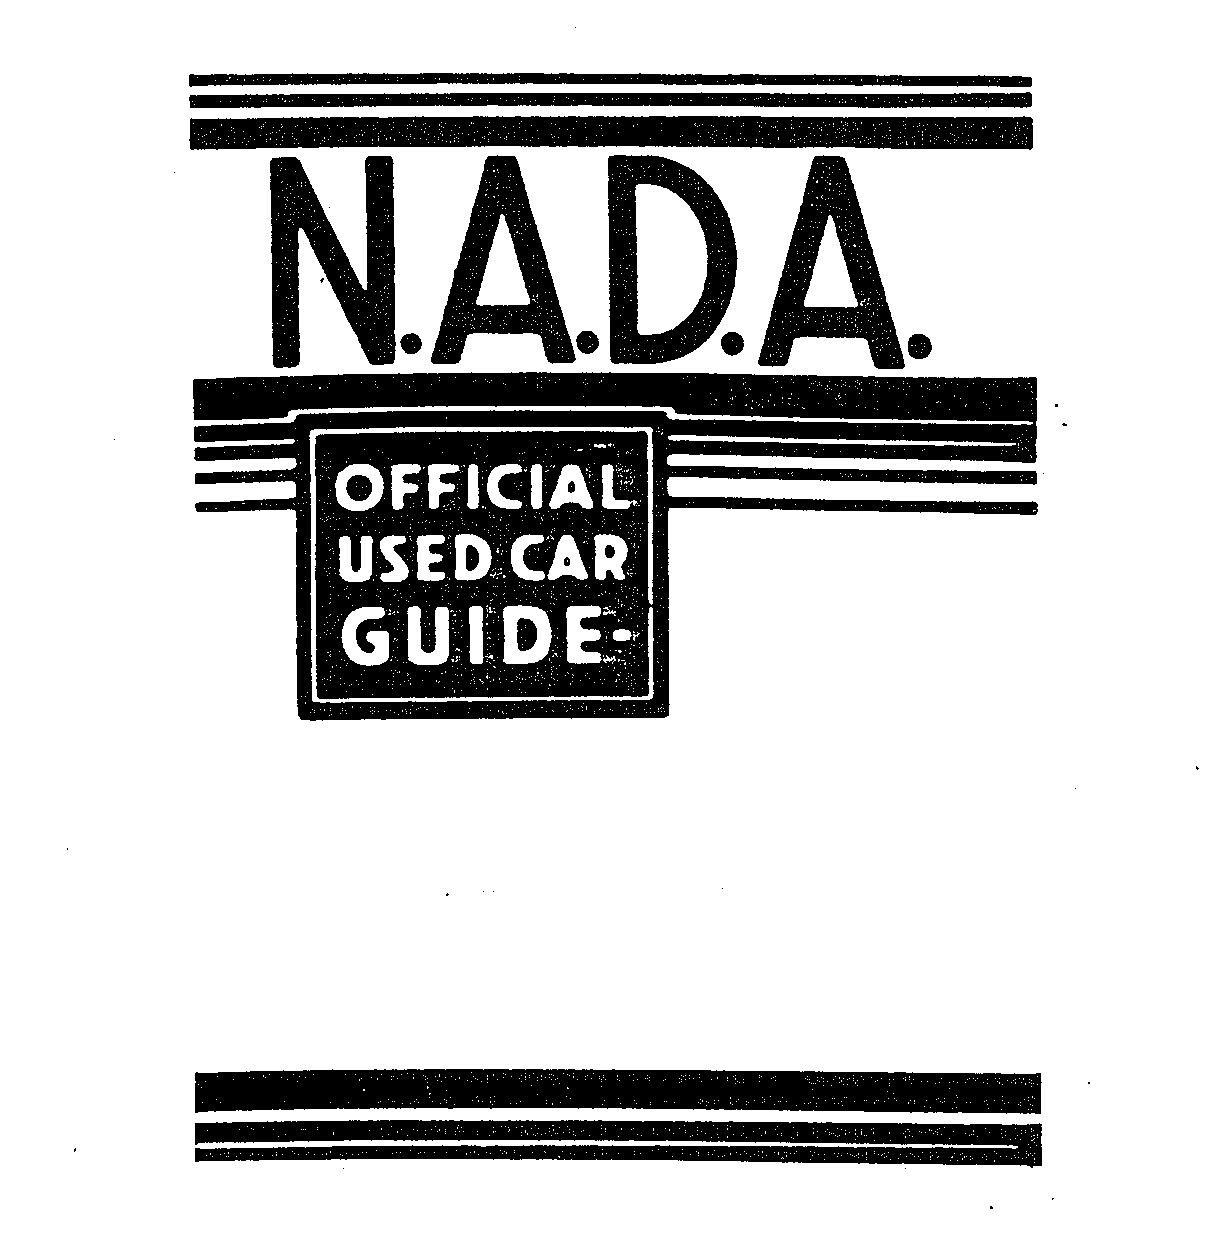  N.A.D.A. OFFICIAL USED CAR GUIDE